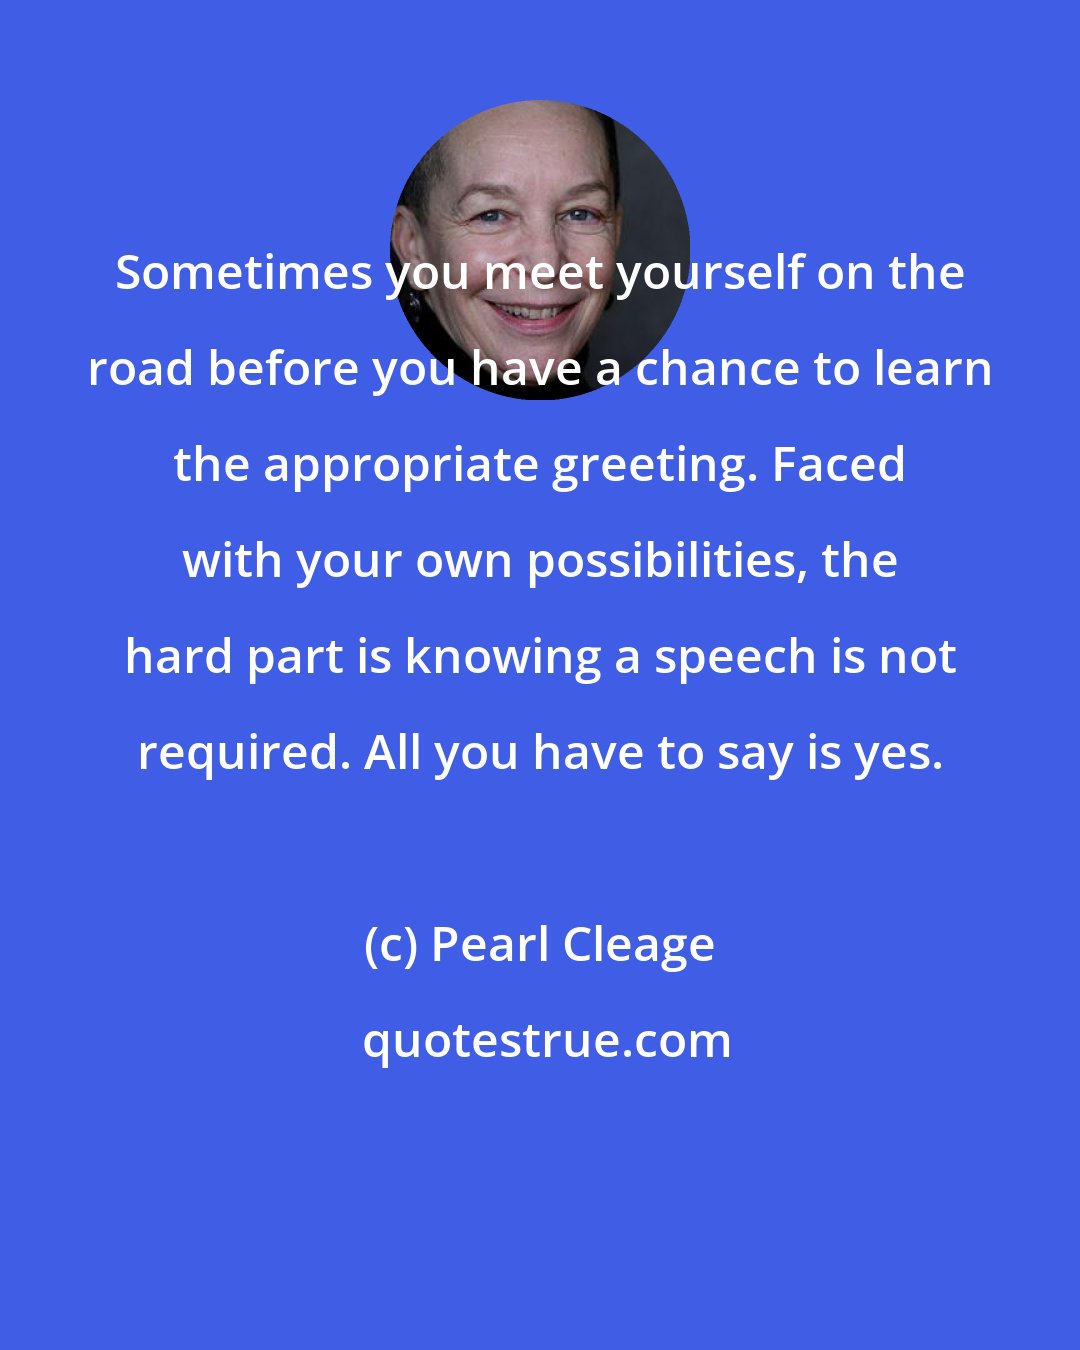 Pearl Cleage: Sometimes you meet yourself on the road before you have a chance to learn the appropriate greeting. Faced with your own possibilities, the hard part is knowing a speech is not required. All you have to say is yes.